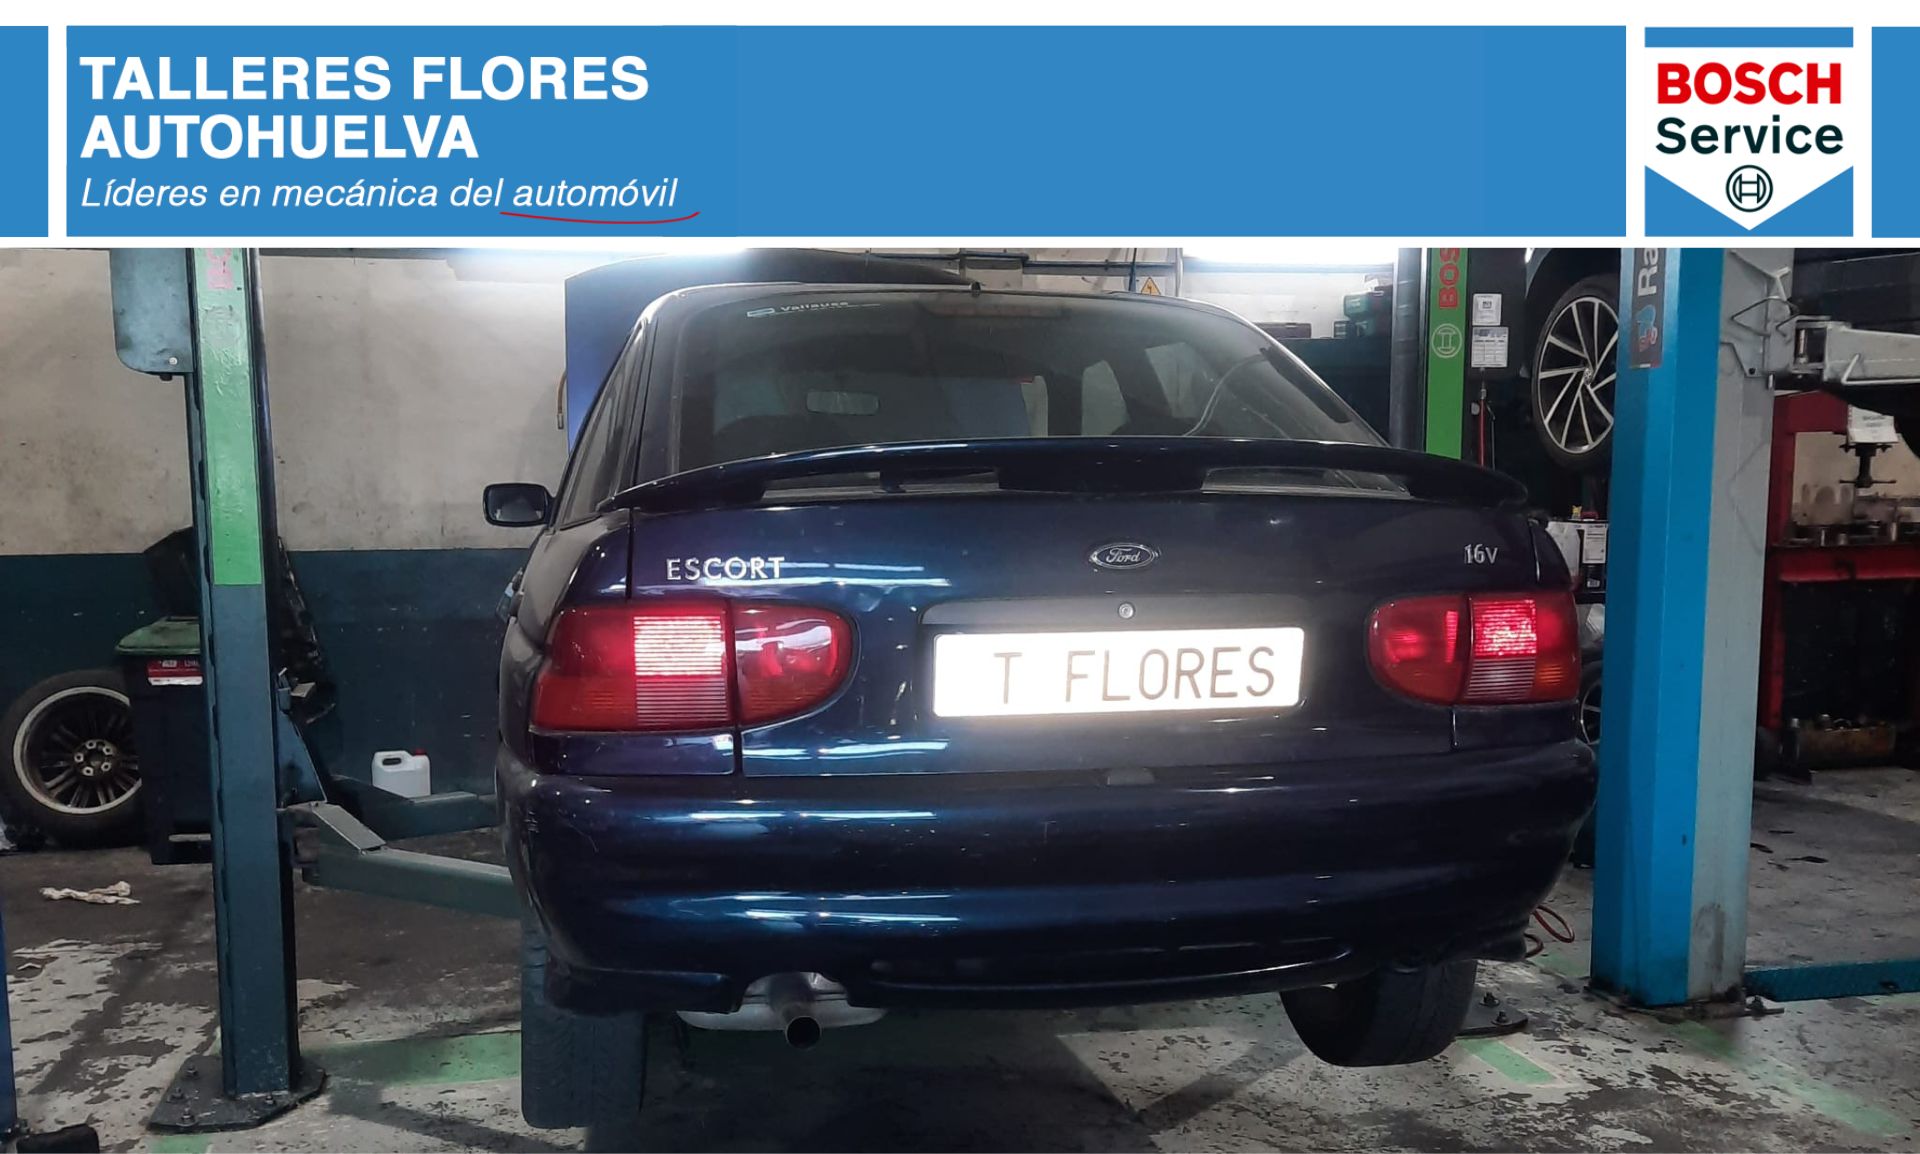 Ford Escort Talleres Flores